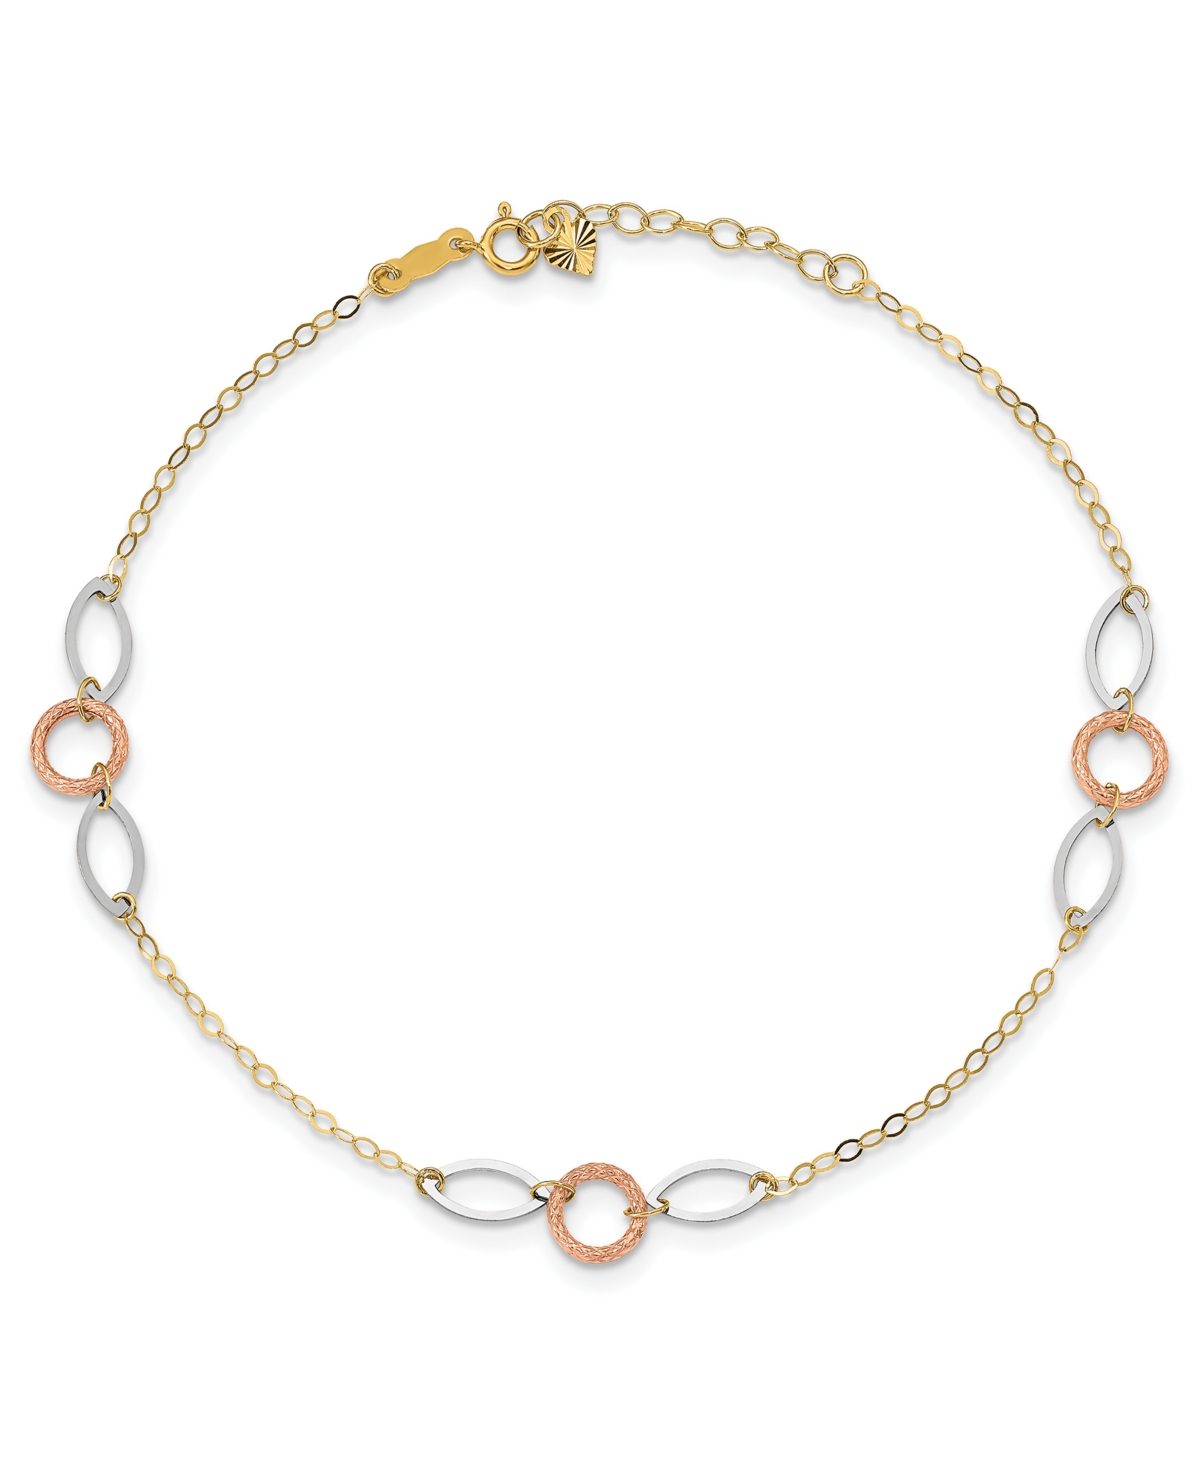 MACY'S CIRCLE AND OVAL ANKLET IN 14K ROSE, WHITE AND YELLOW GOLD